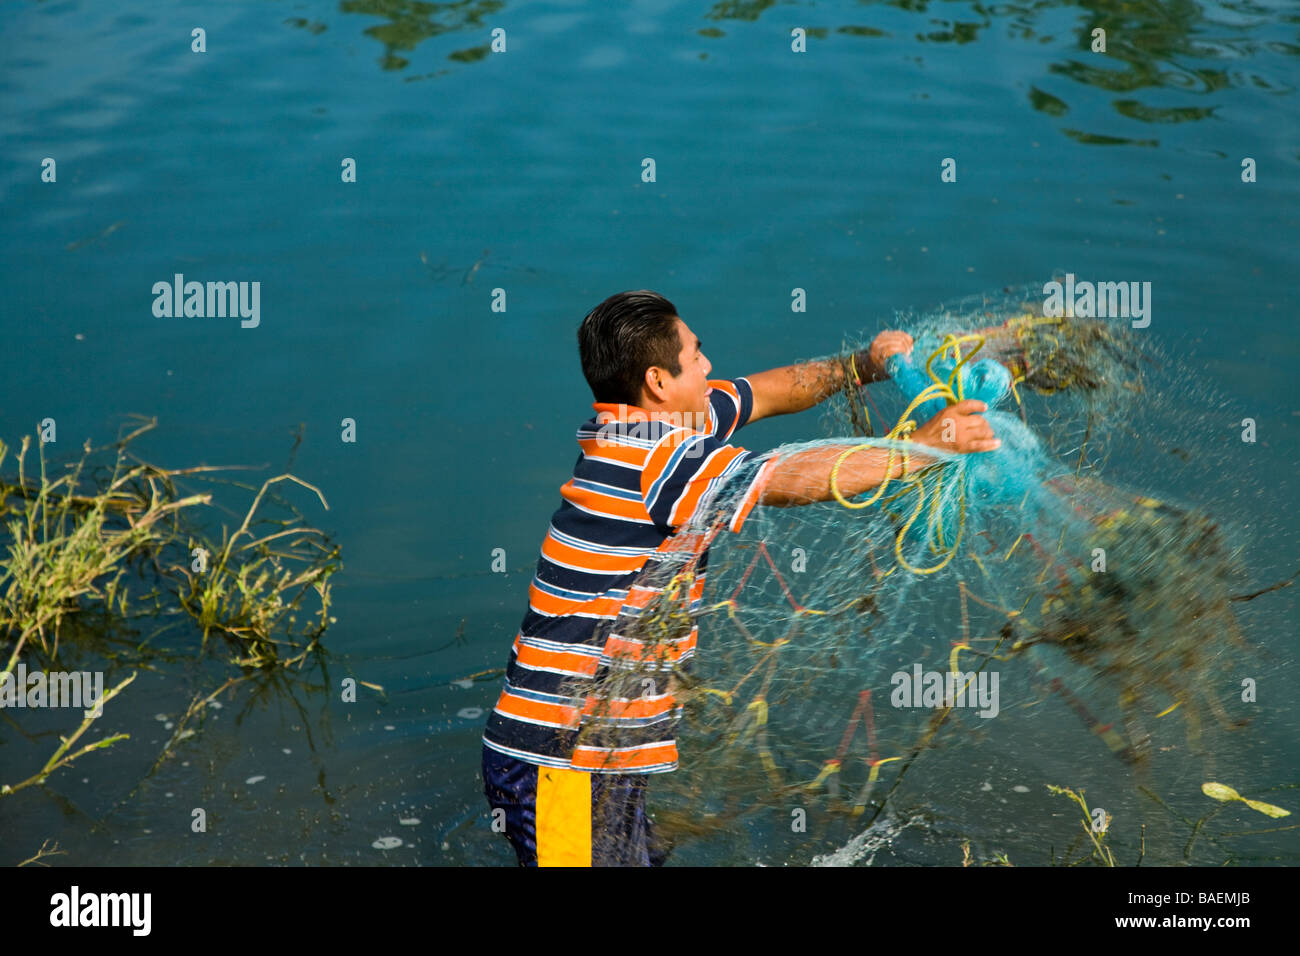 MEXICO San Jose del Cabo Mexican man throwing net by hand while fishing in freshwater river that feeds estuary Stock Photo